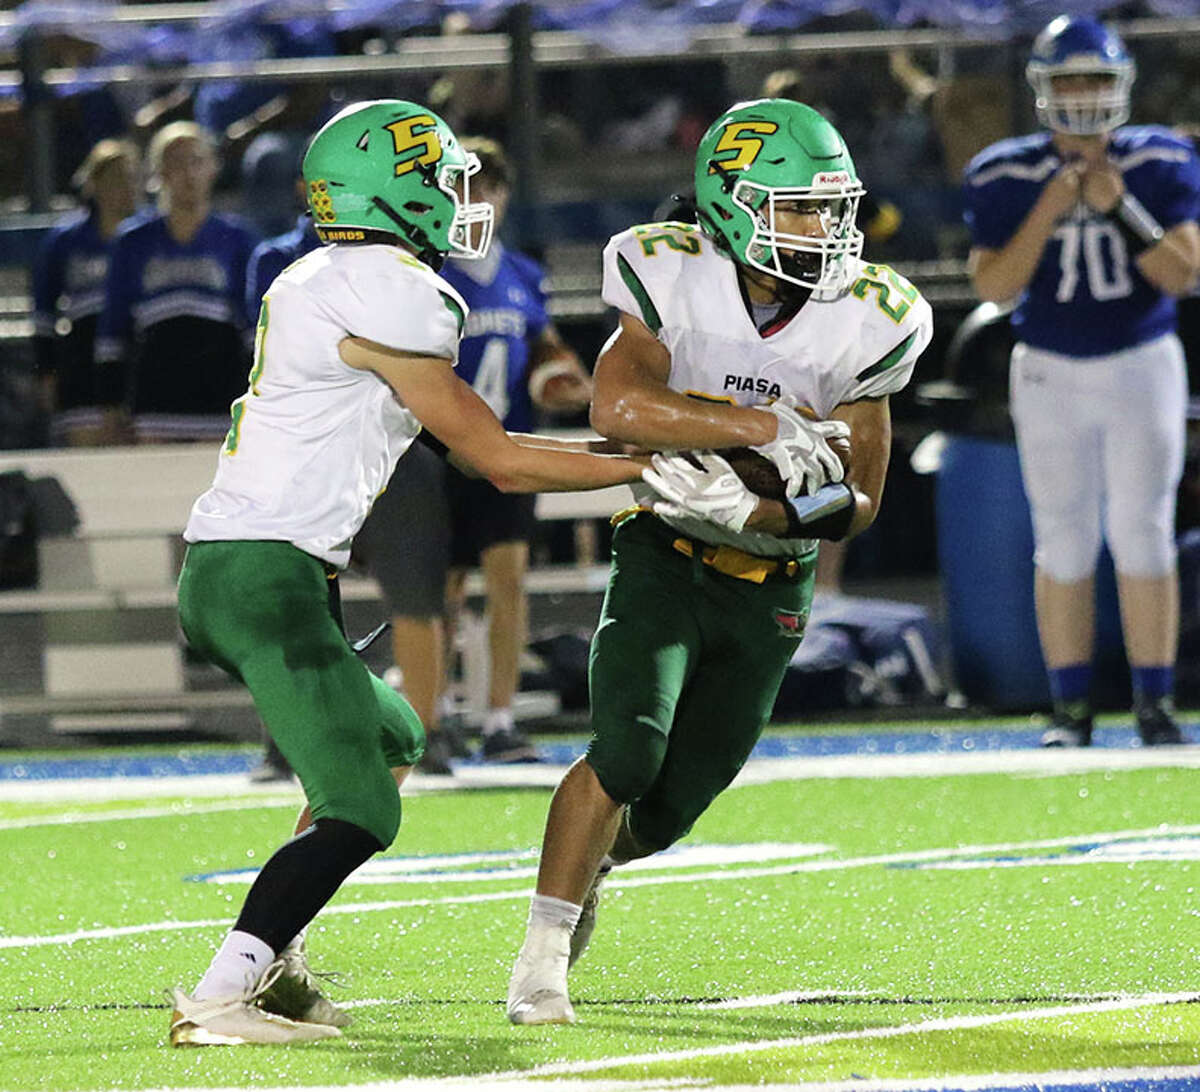 Southwestern's Jacob Fisher (right) takes a handoff from QB Quinten Strohbeck in a Week 6 game at Carlinville. On Friday night, Fisher rushed for a career-high 133 yards in the Piasa Birds' SCC victory over Vandalia at Knapp Field in Piasa.